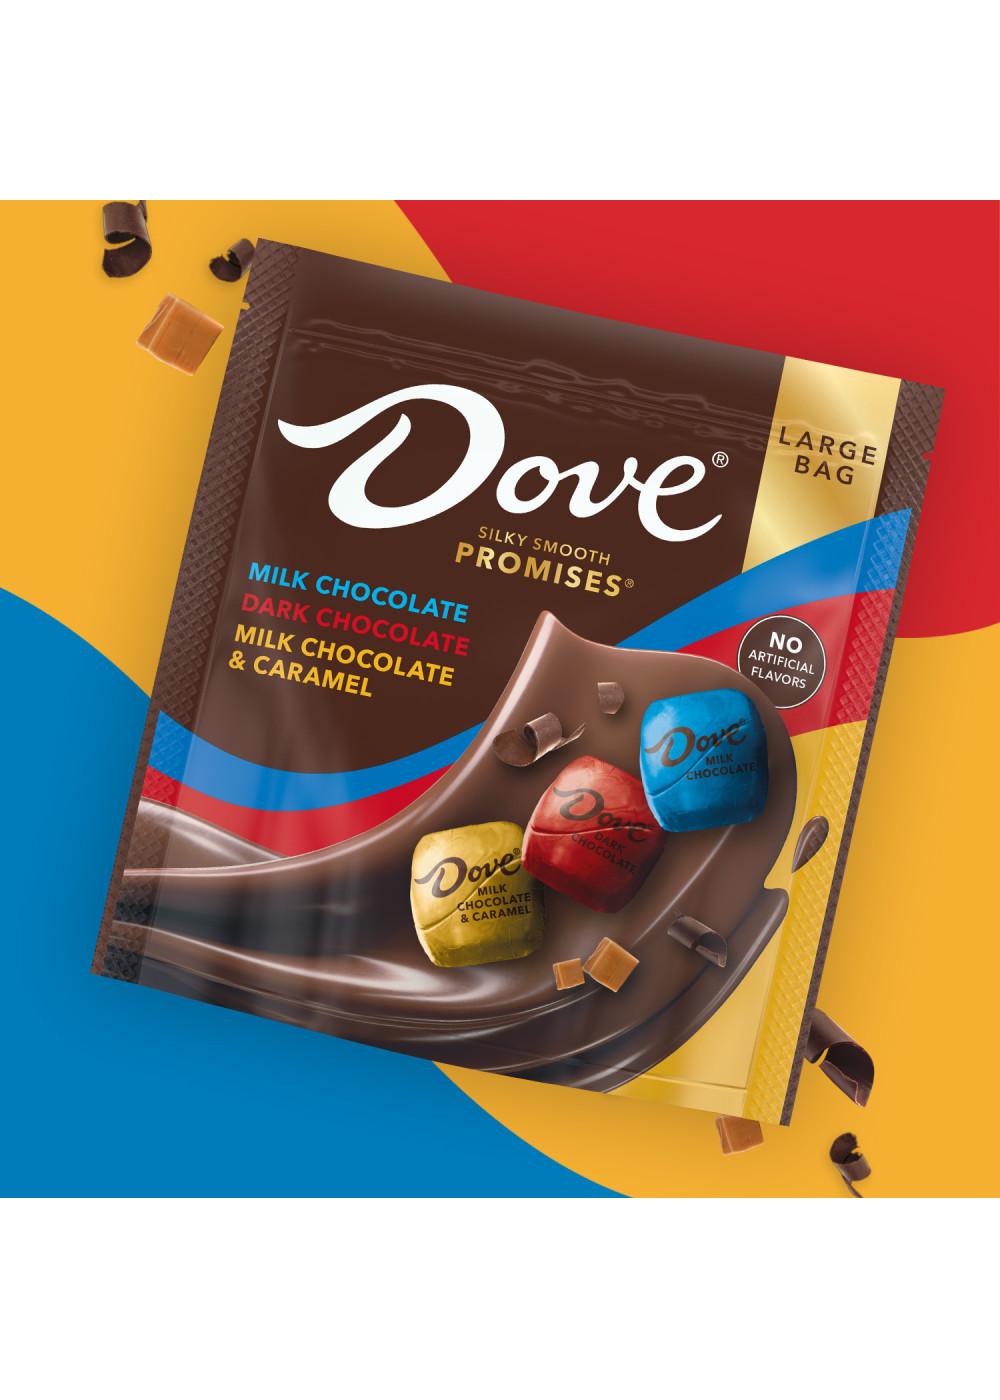 Dove Promises Assorted Chocolate Candy - Large Bag; image 6 of 7